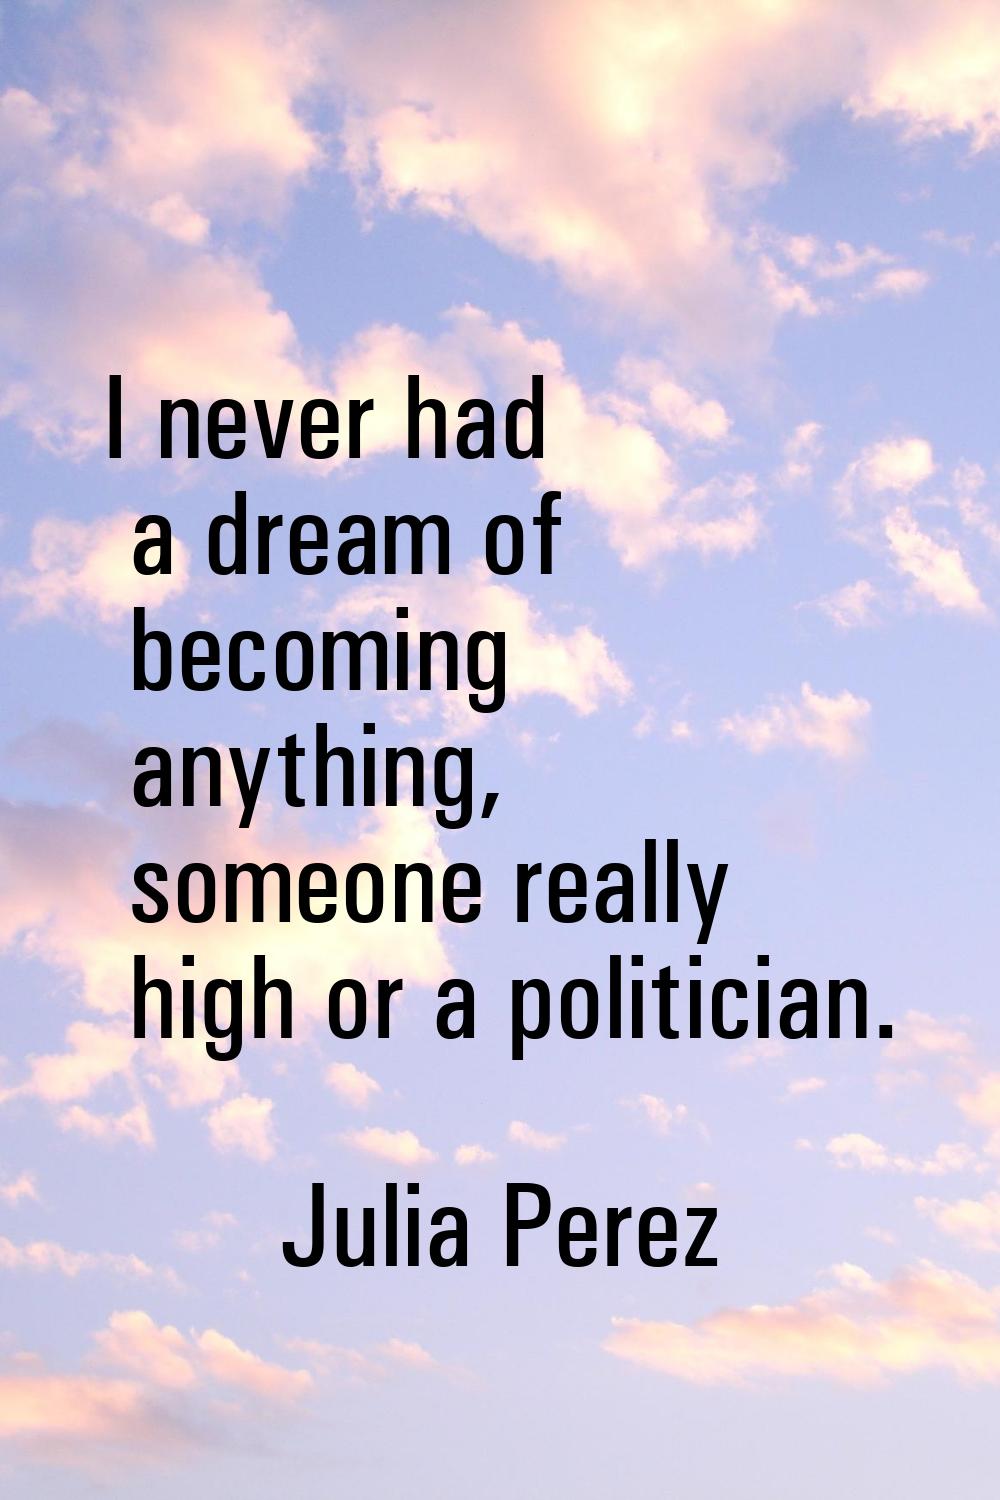 I never had a dream of becoming anything, someone really high or a politician.